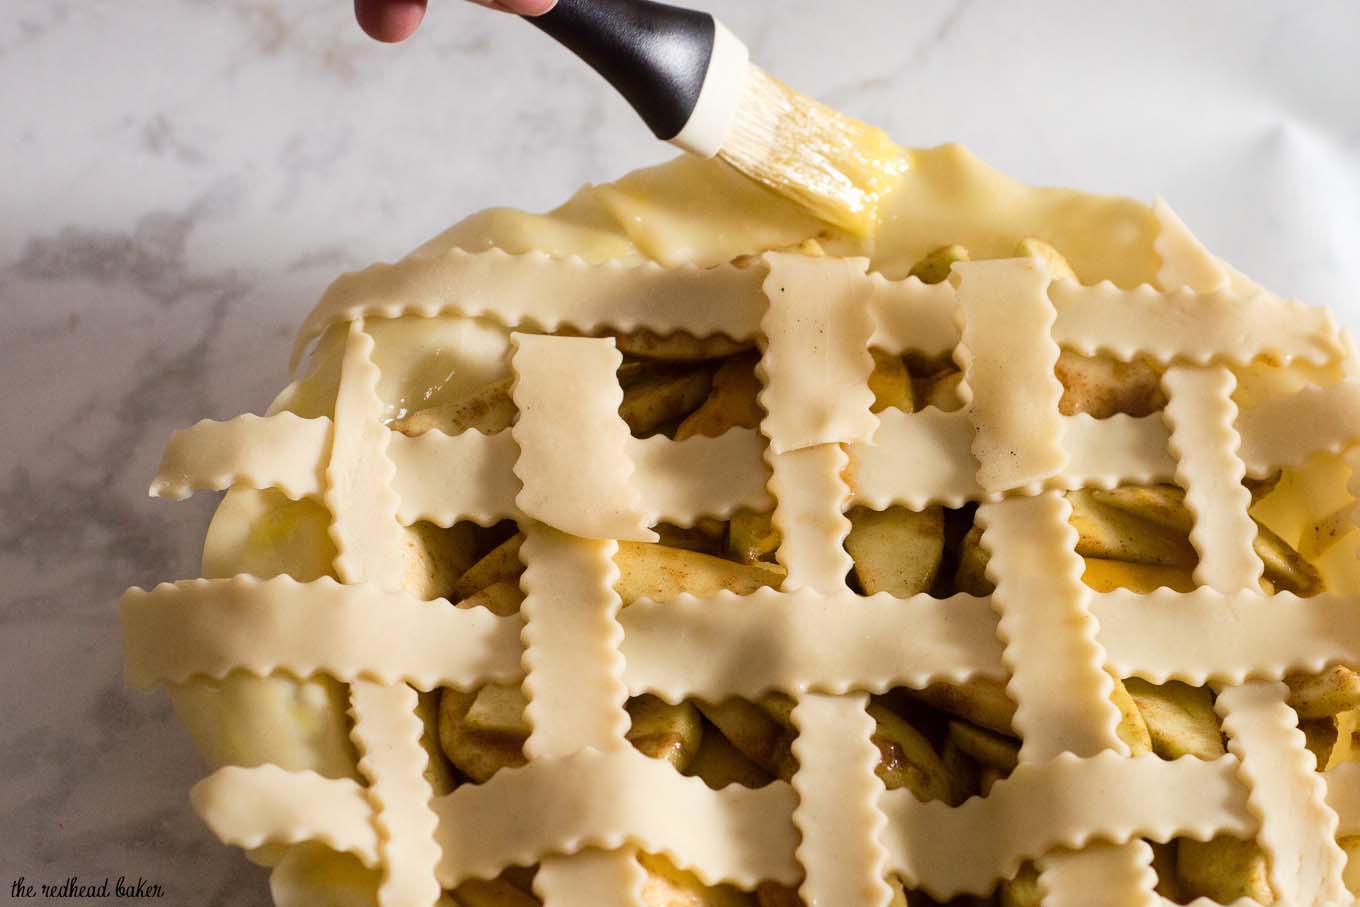 Salted caramel apple pie with a beautiful lattice crust is a delicious dessert any time of year. Make this pie ahead of time and freeze it before baking.